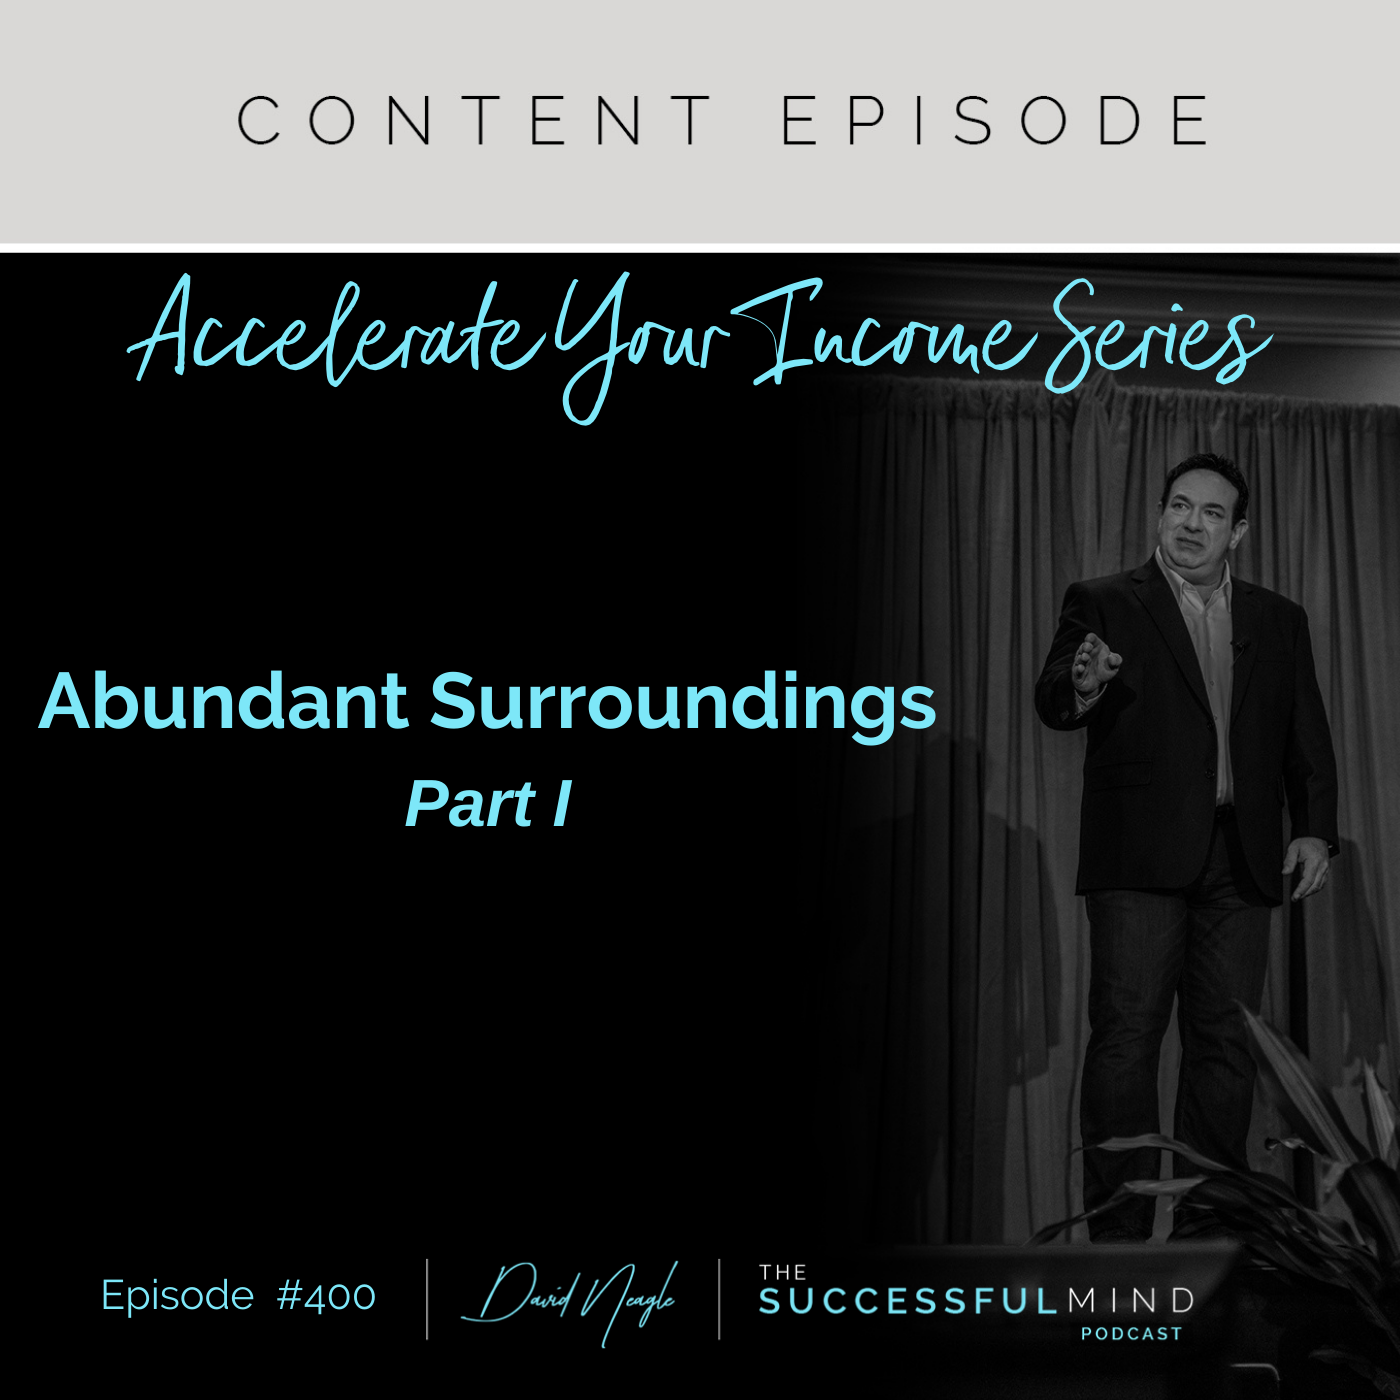 The Successful Mind Podcast - Episode 400 - Accelerate Your Income Series: Abundant Surroundings - Part I